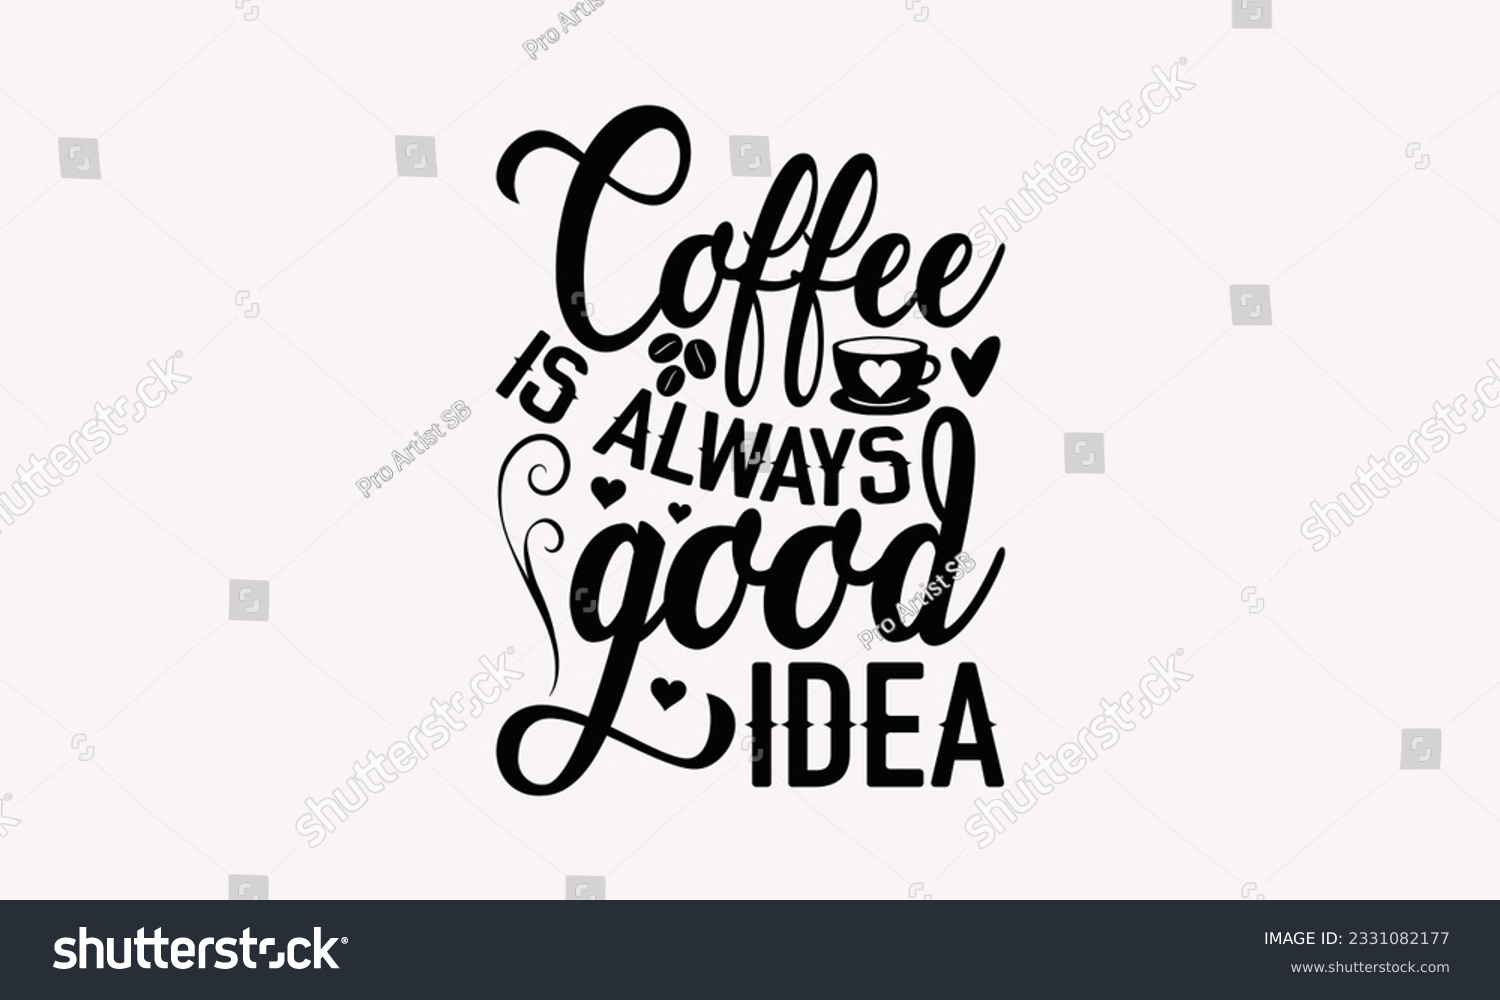 SVG of Coffee is always good idea - Coffee SVG Design Template, Drink Quotes, Calligraphy graphic design, Typography poster with old style camera and quote. svg